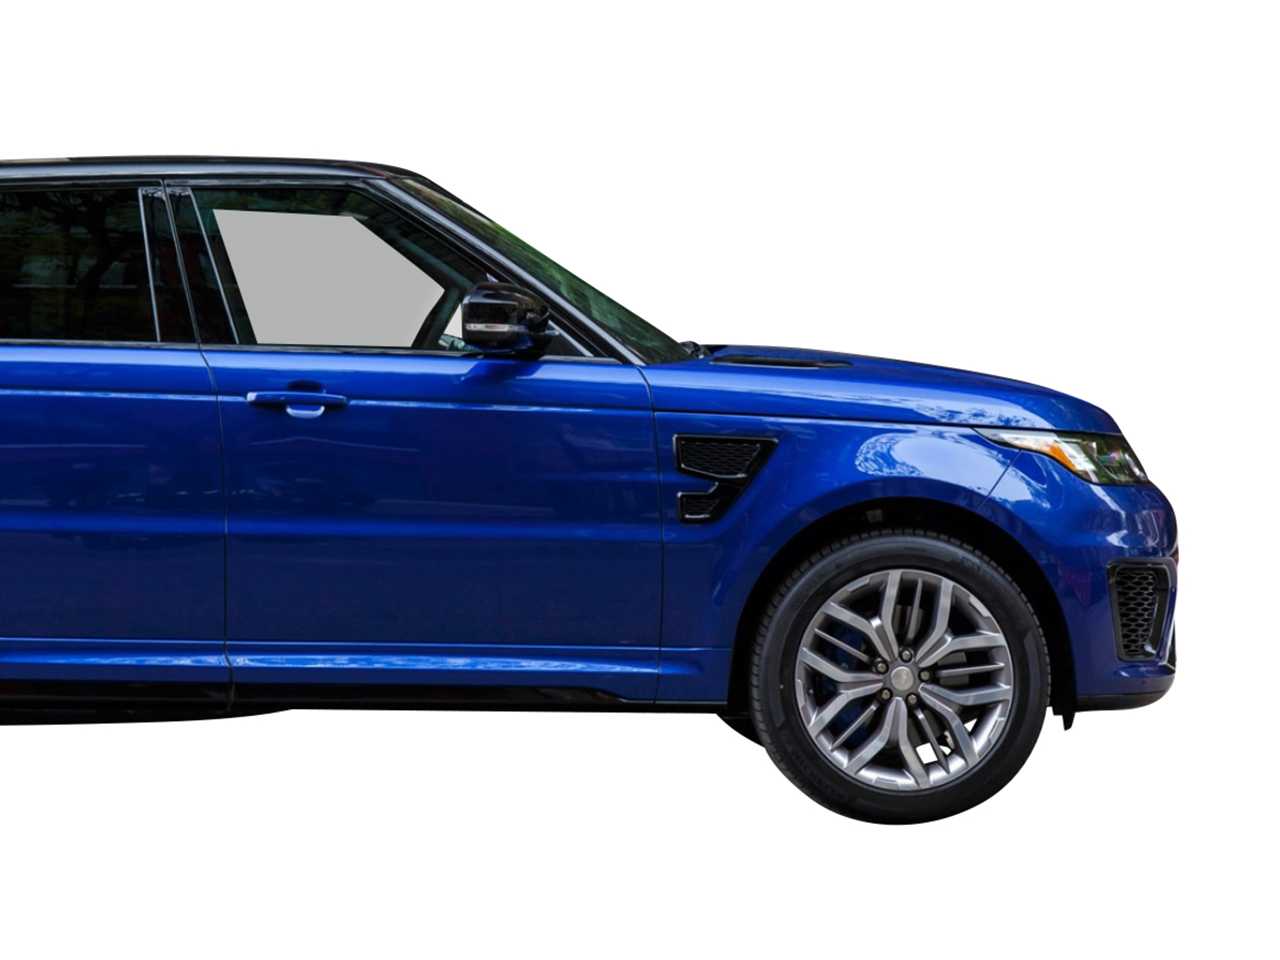 Range Rover Sport SVR car for hire in London by Hertz Dream Collection